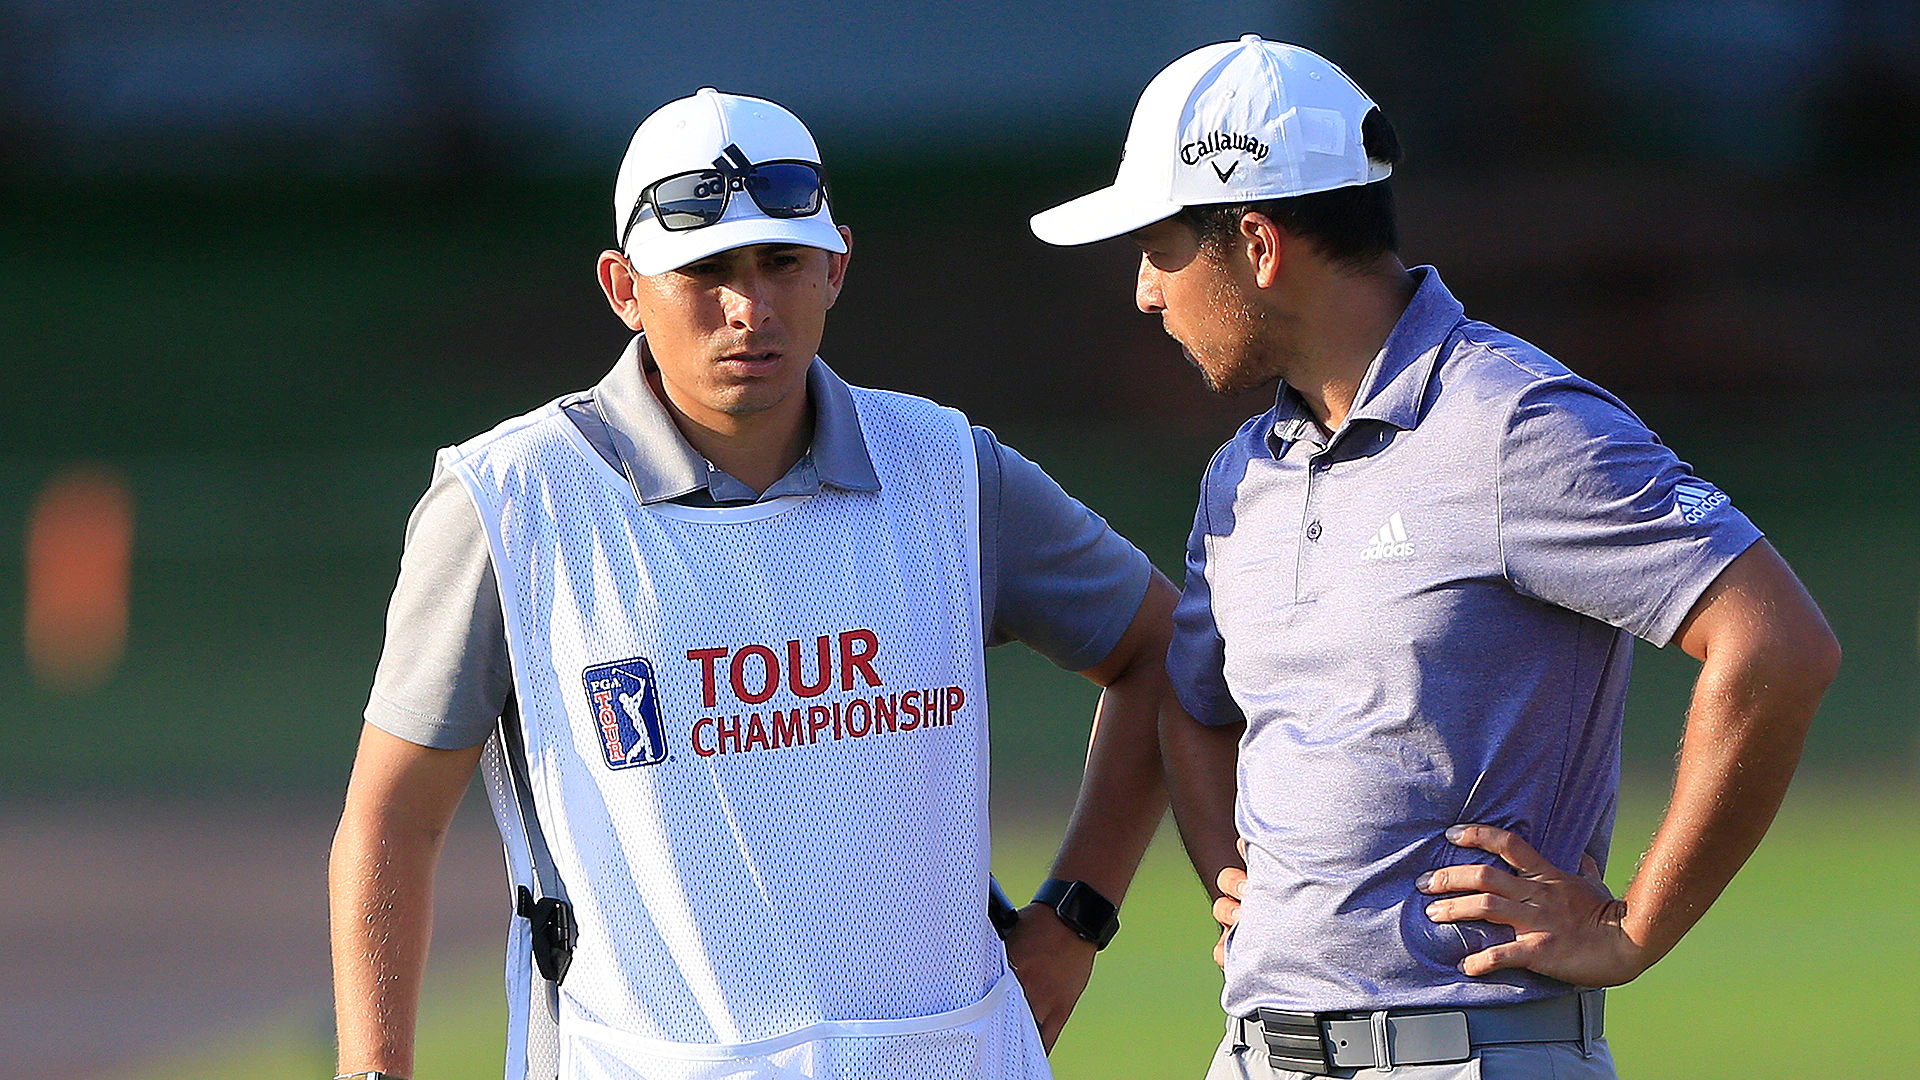 Xander Schauffele trails by five shots, but leads by two through 54 holes this week